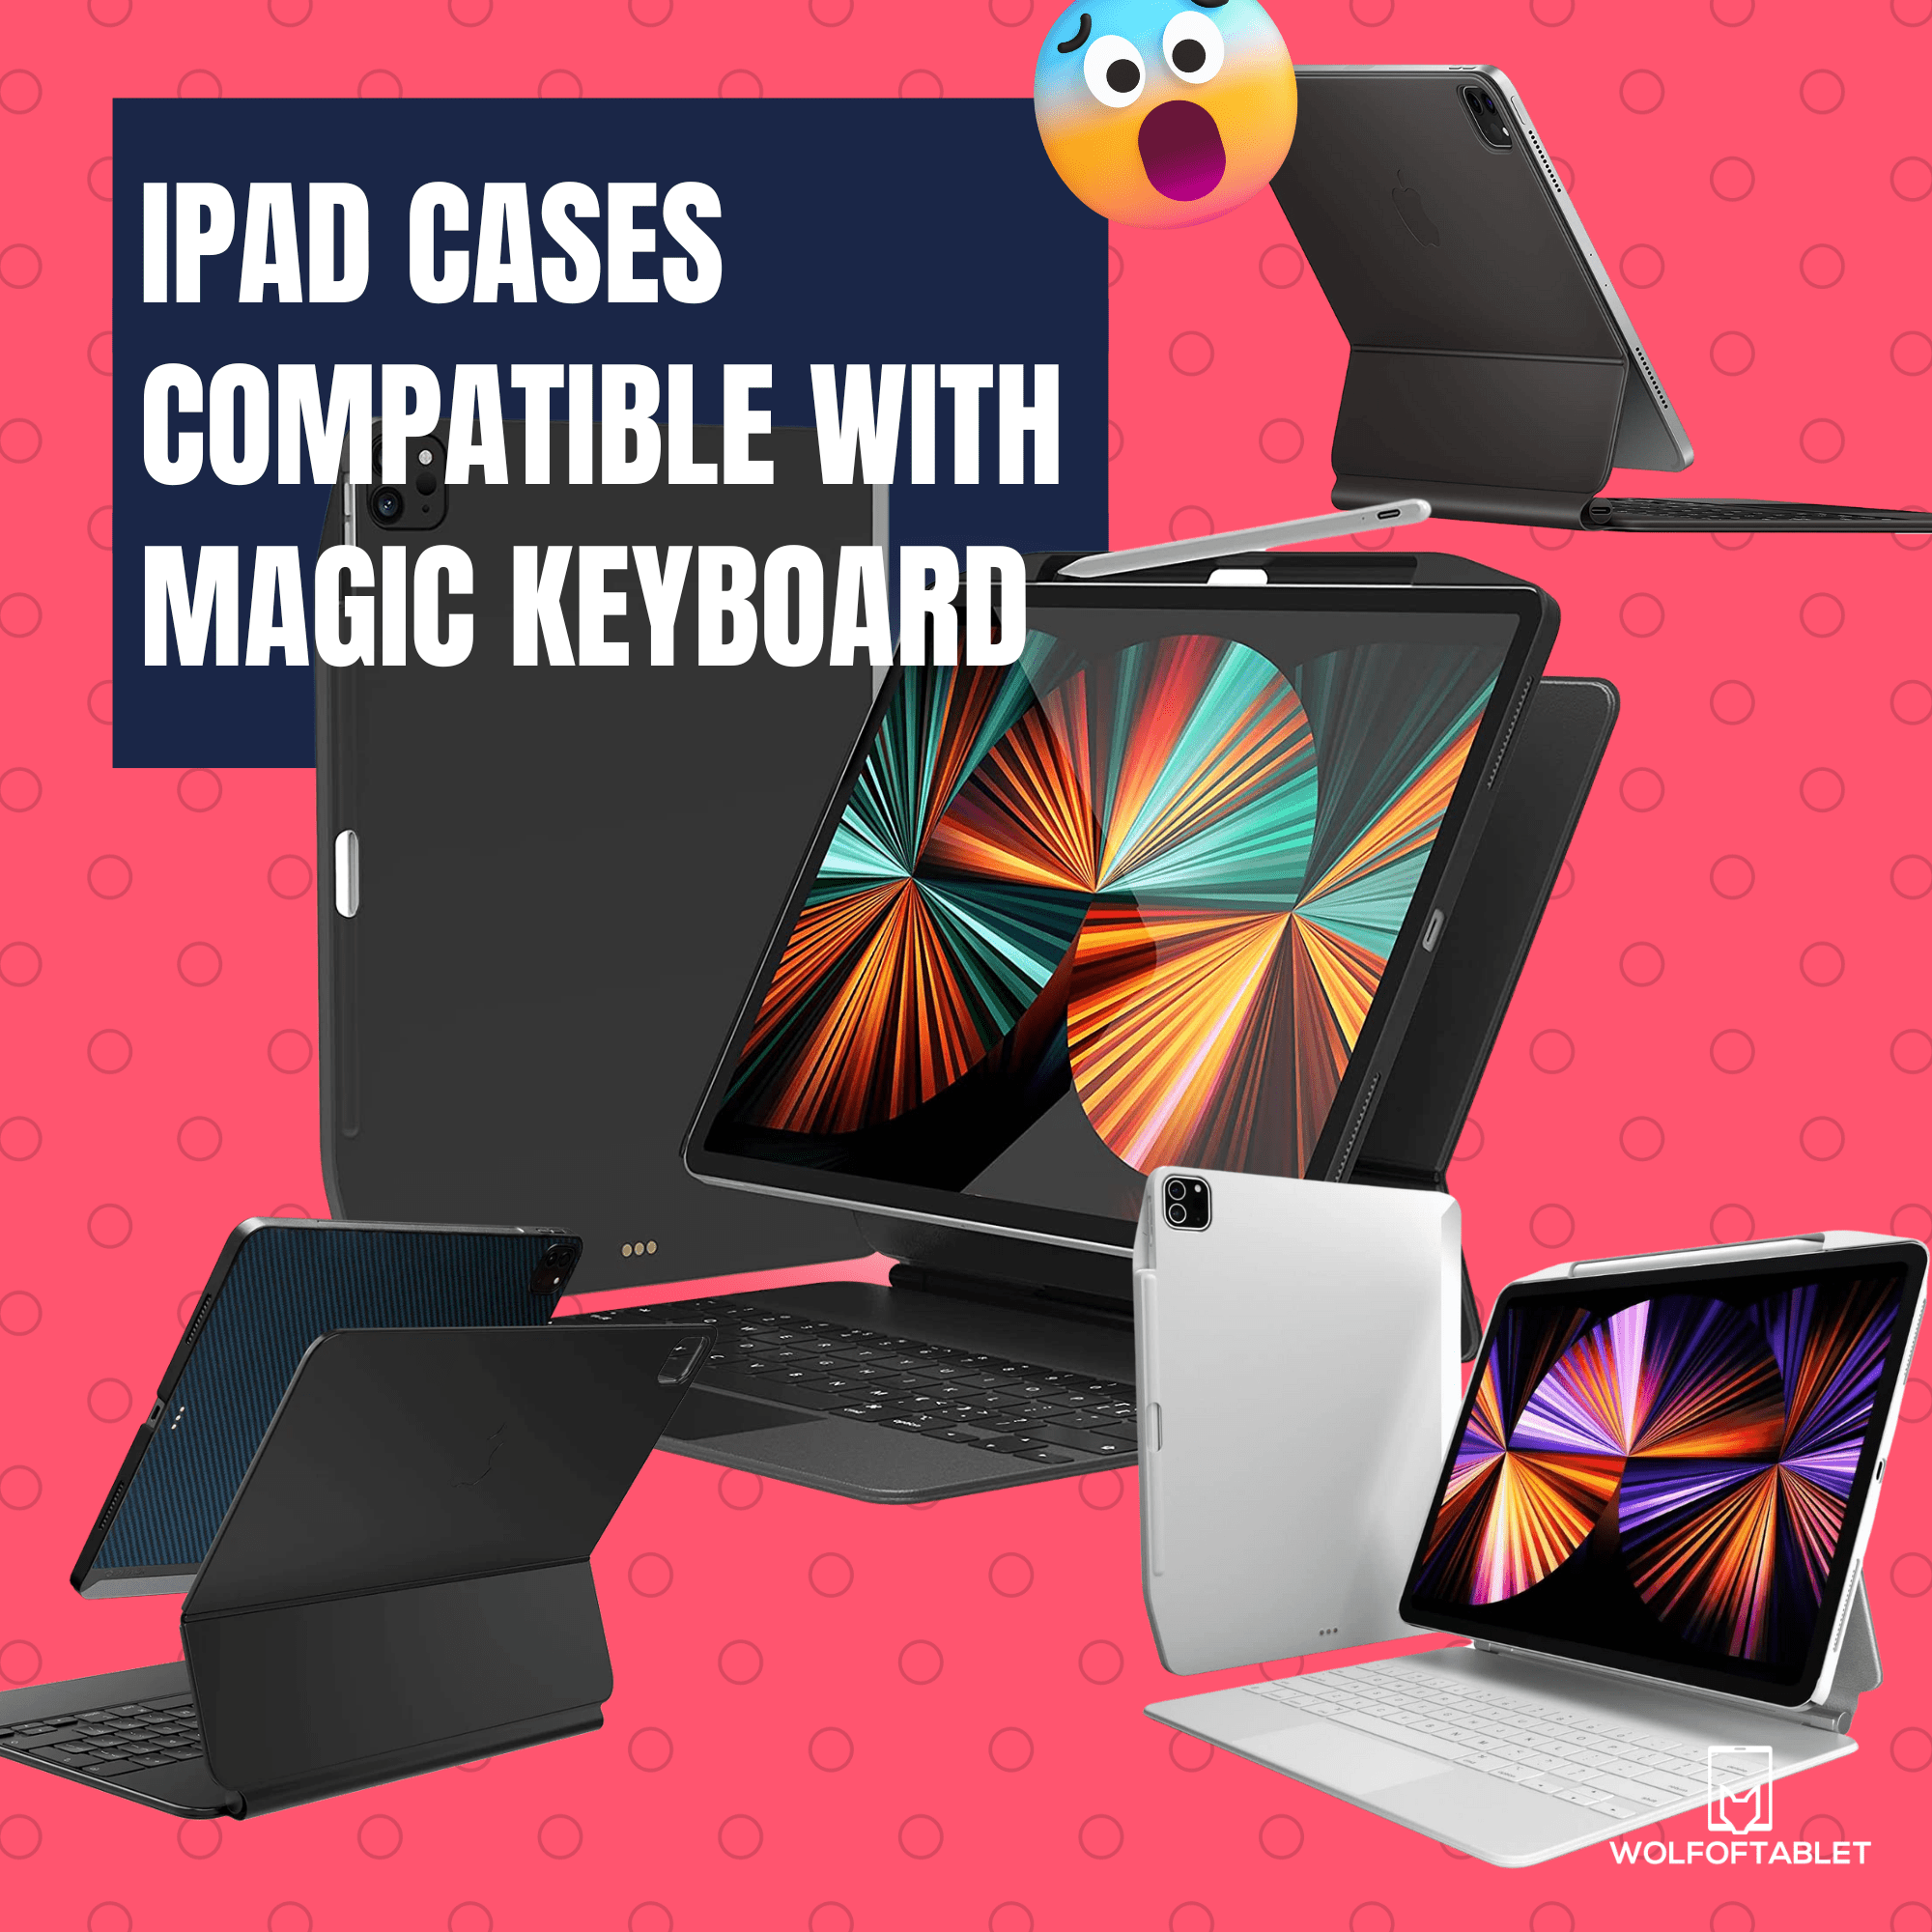 ipad cases compatible with magic keyboard